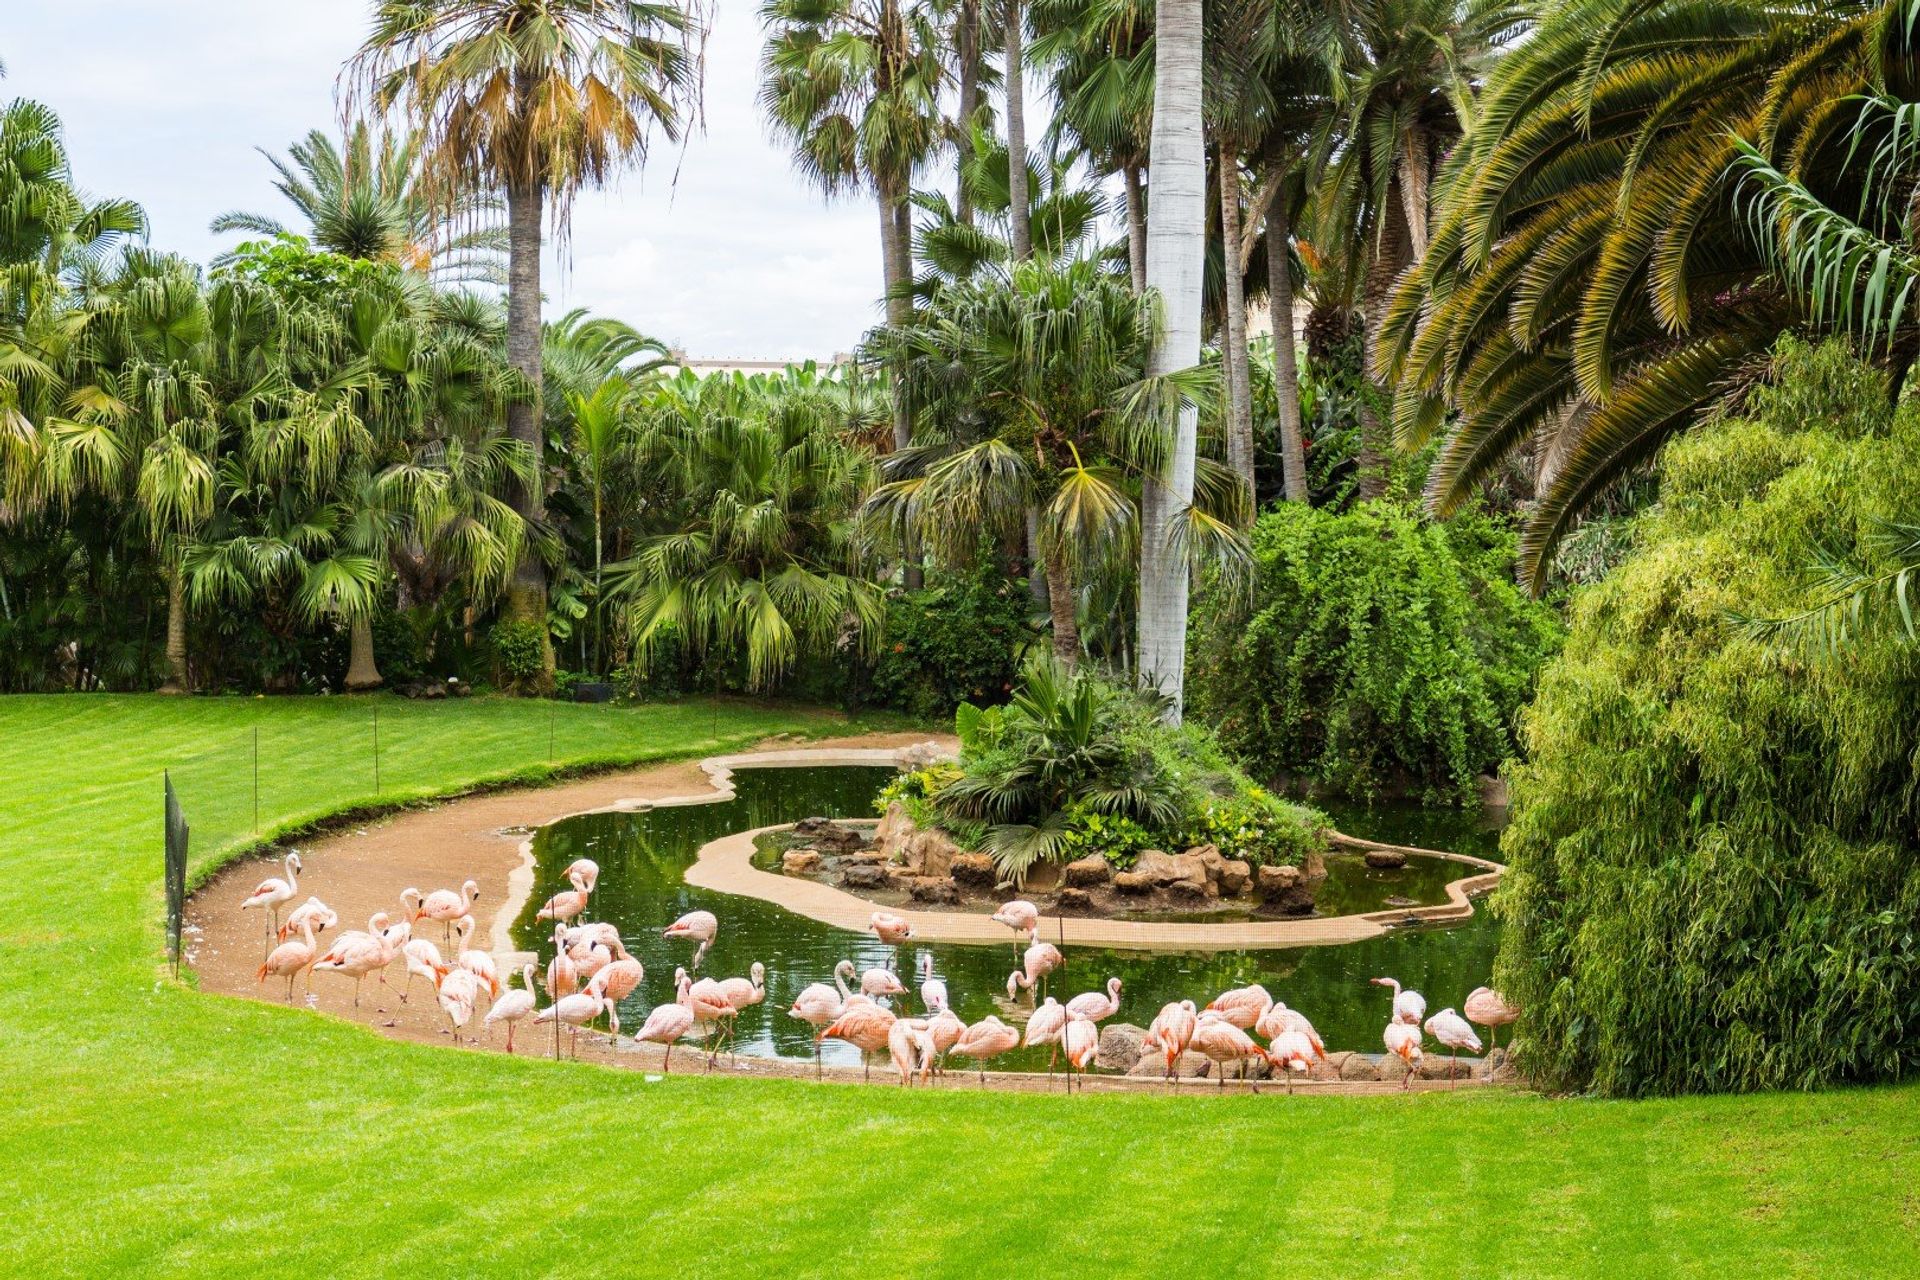 Bird lover or not, you'll love watching the colourful flamingos wandering around Loro Park in the heart of Puerto de la Cruz